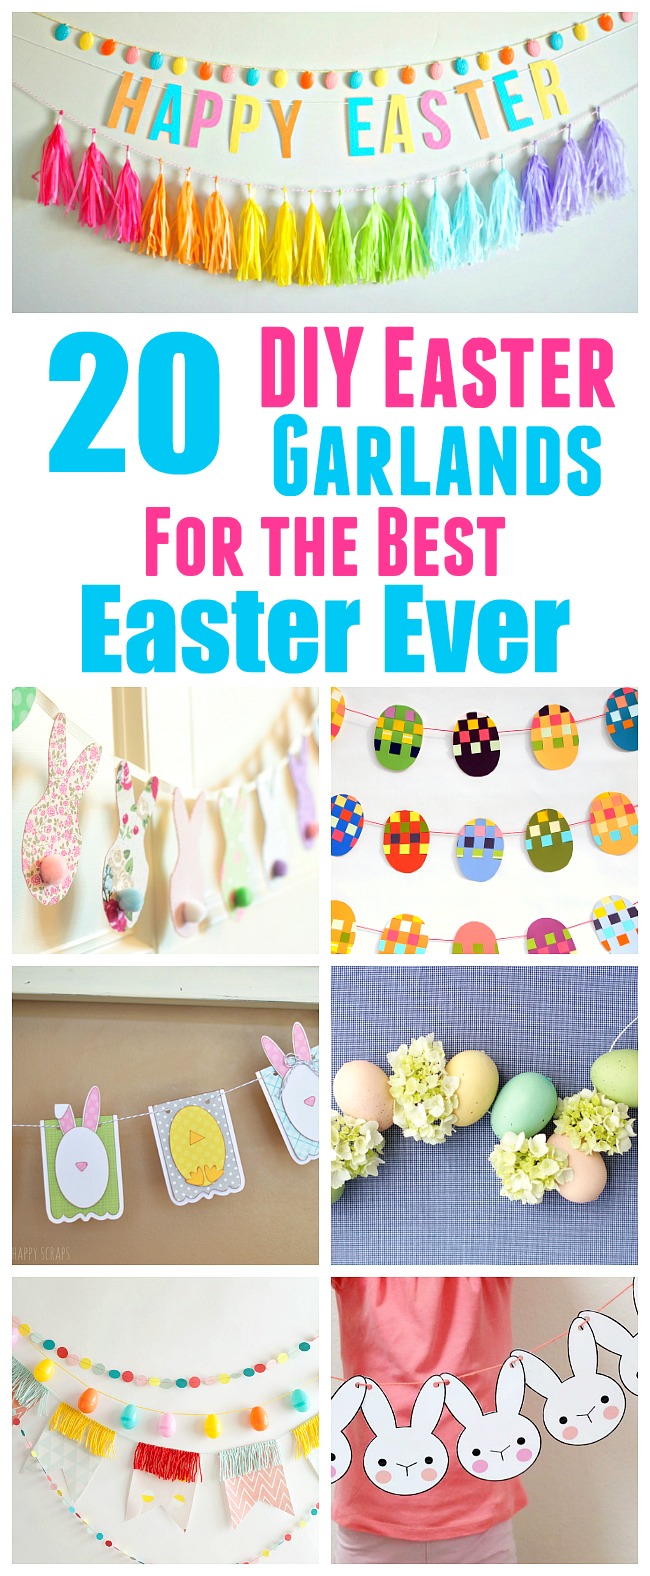 20 Festive DIY Easter Garlands and Banners